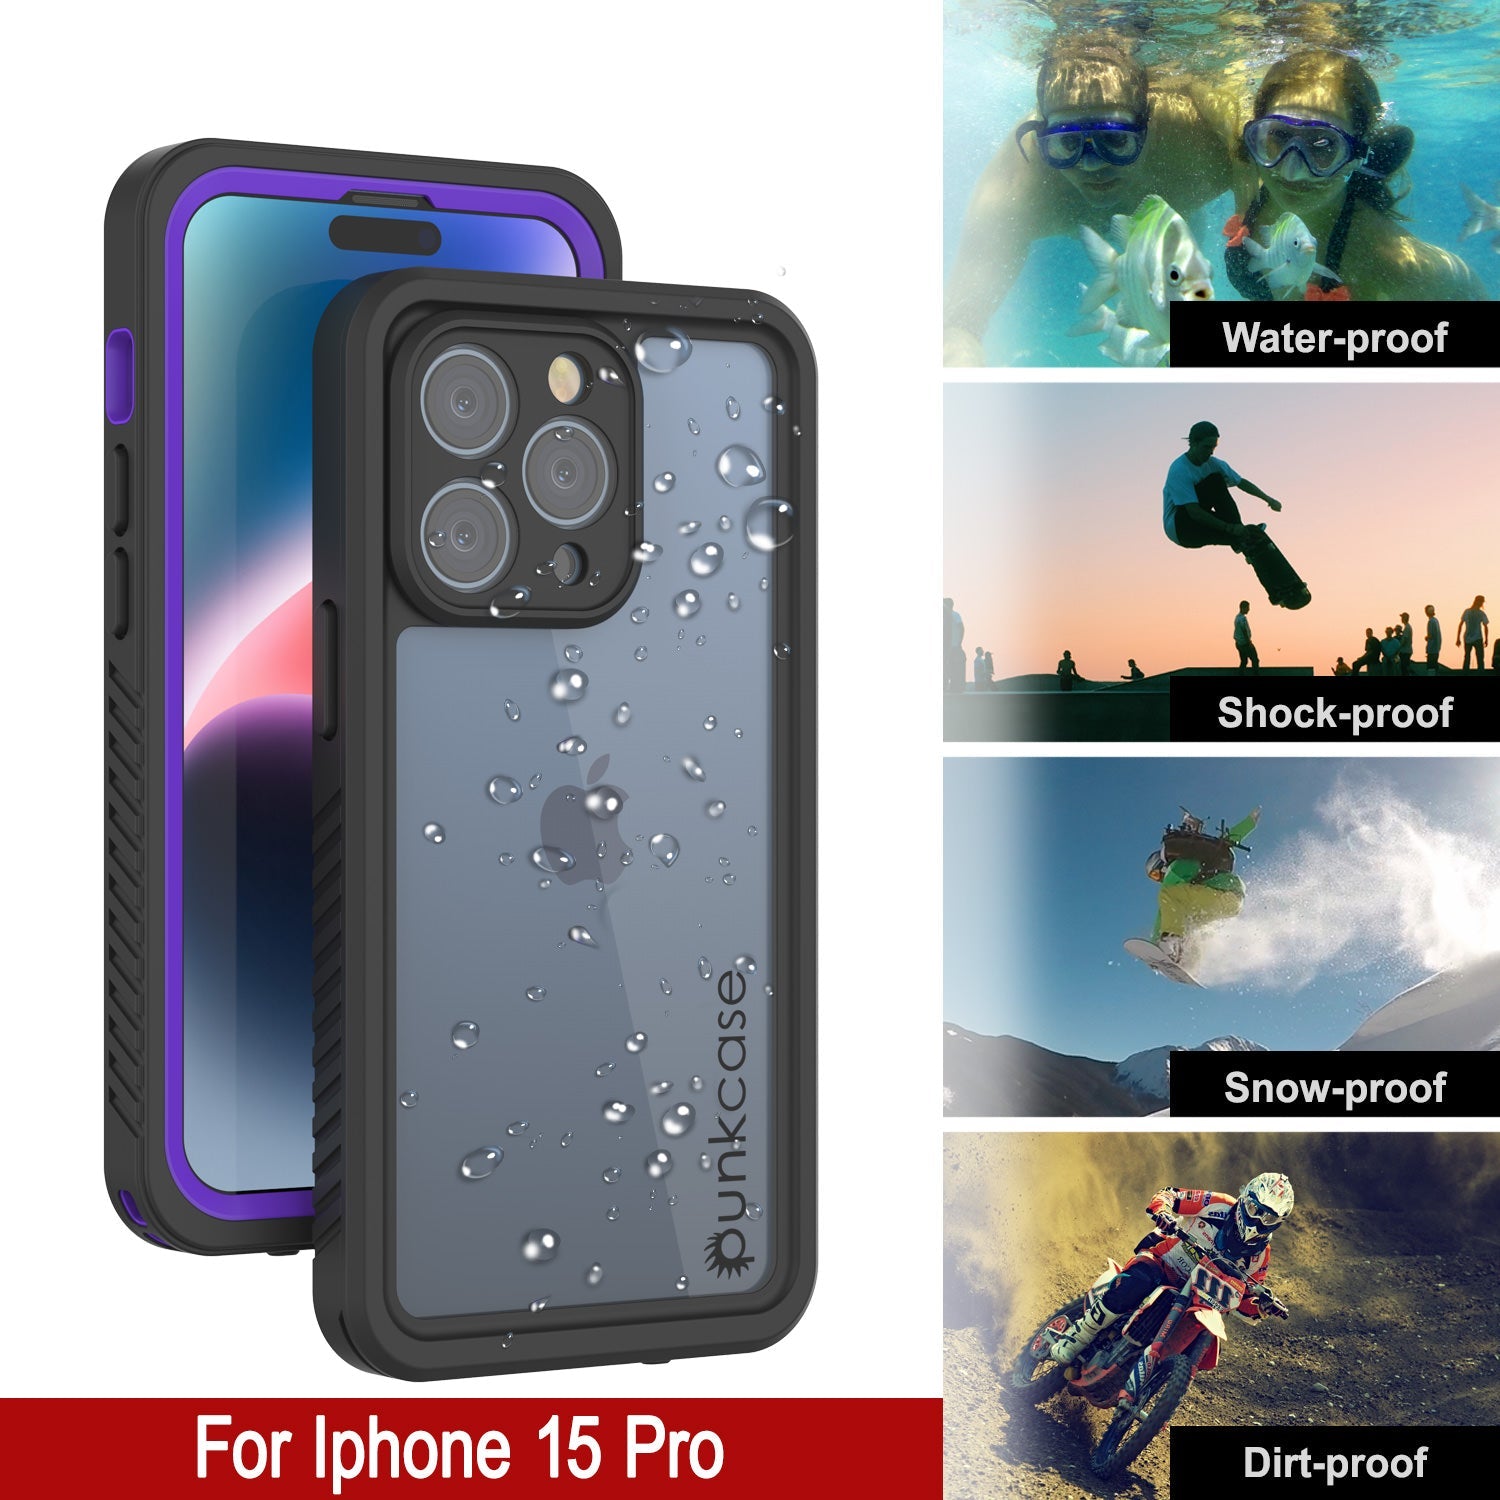 iPhone 15 Pro Waterproof Case, Punkcase [Extreme Series] Armor Cover W/ Built In Screen Protector [Purple]